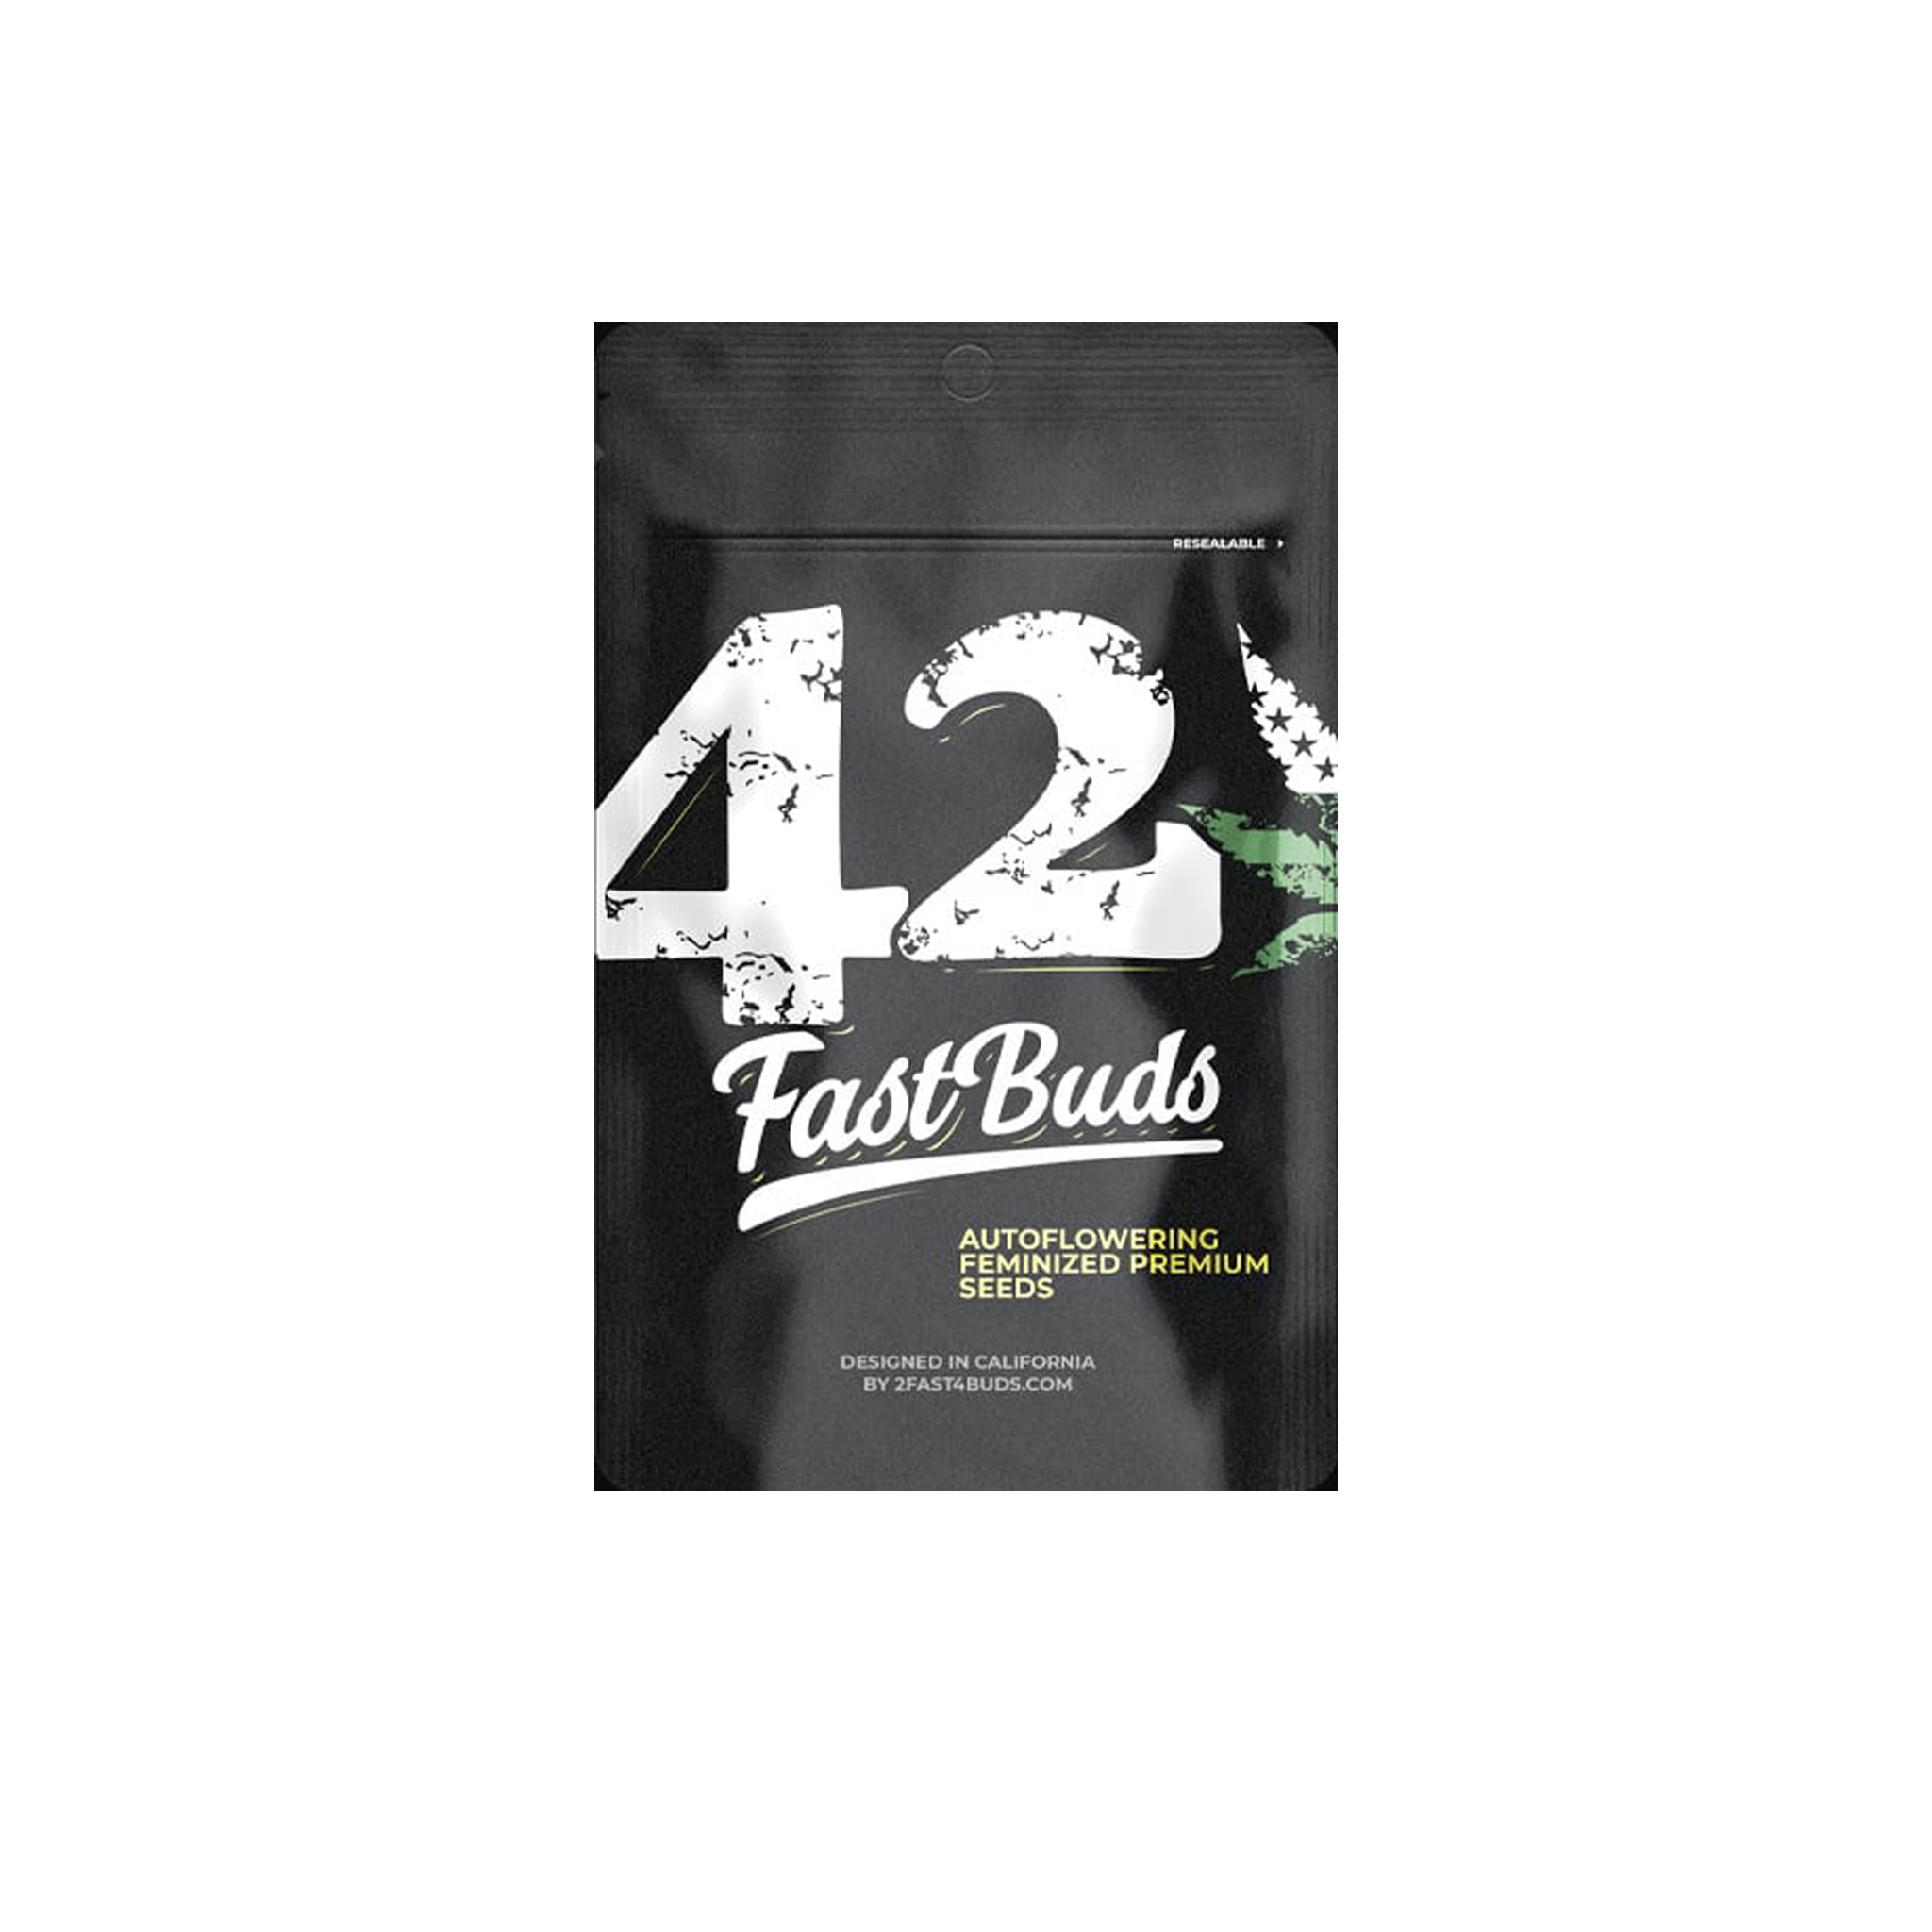 Mexican Airlines Automatic Cannabis Seeds - Buy 420FastBuds seeds